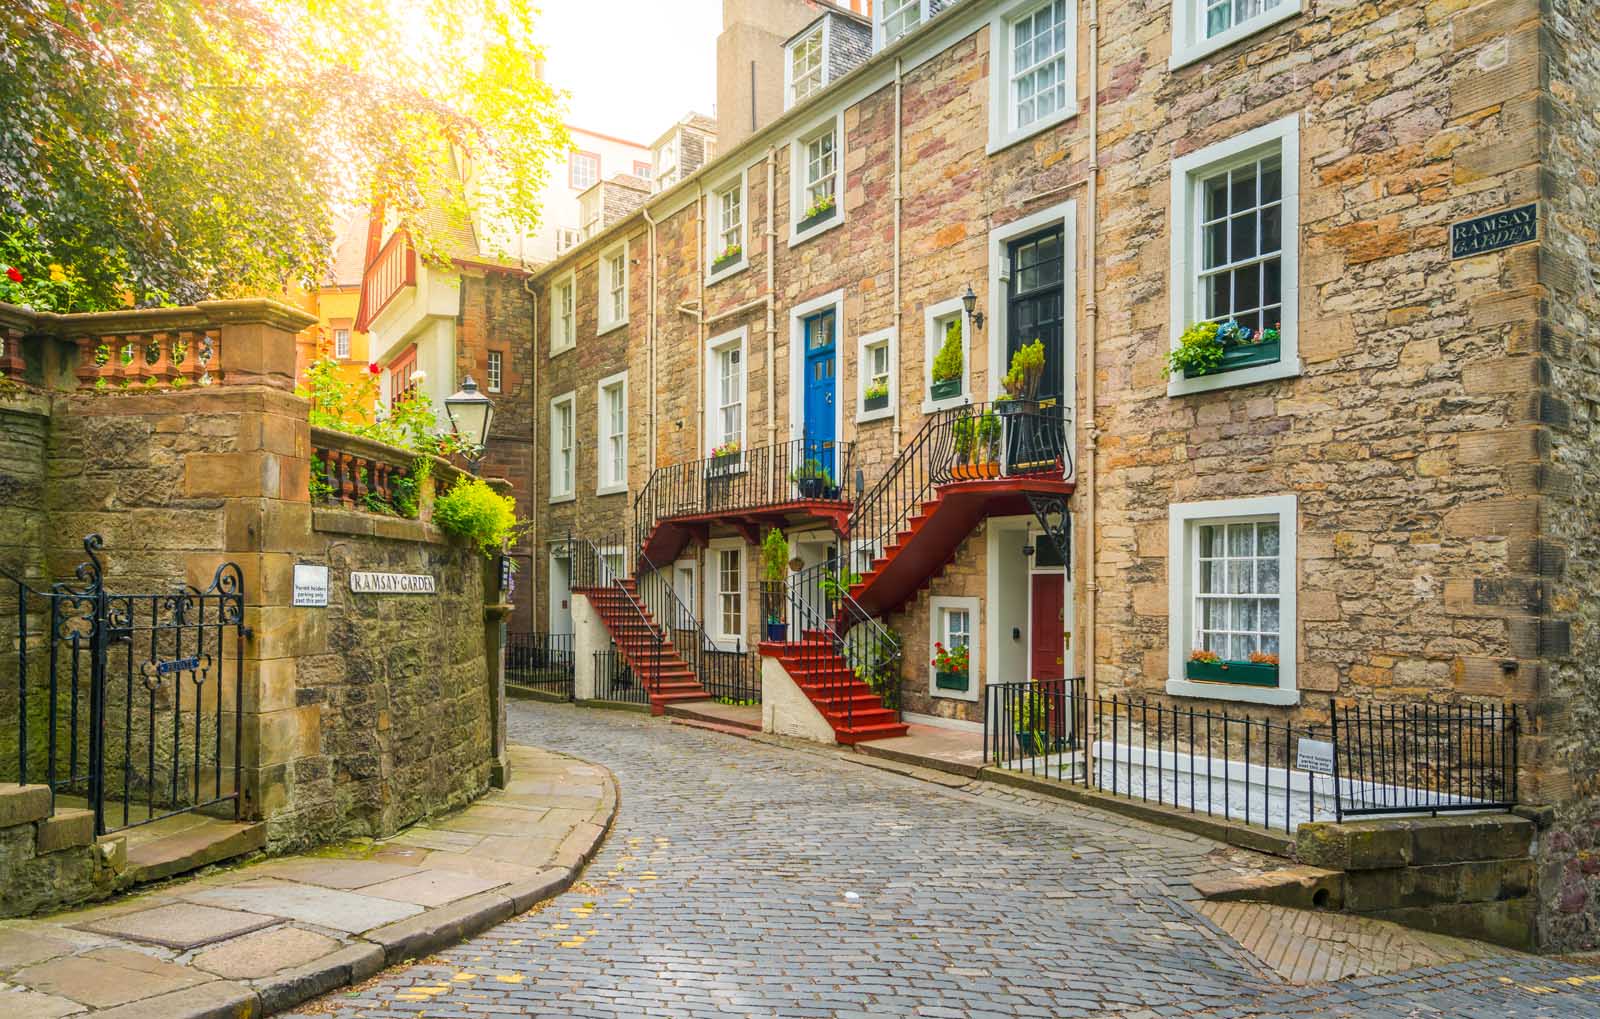 Street view of old town area of Edinburgh